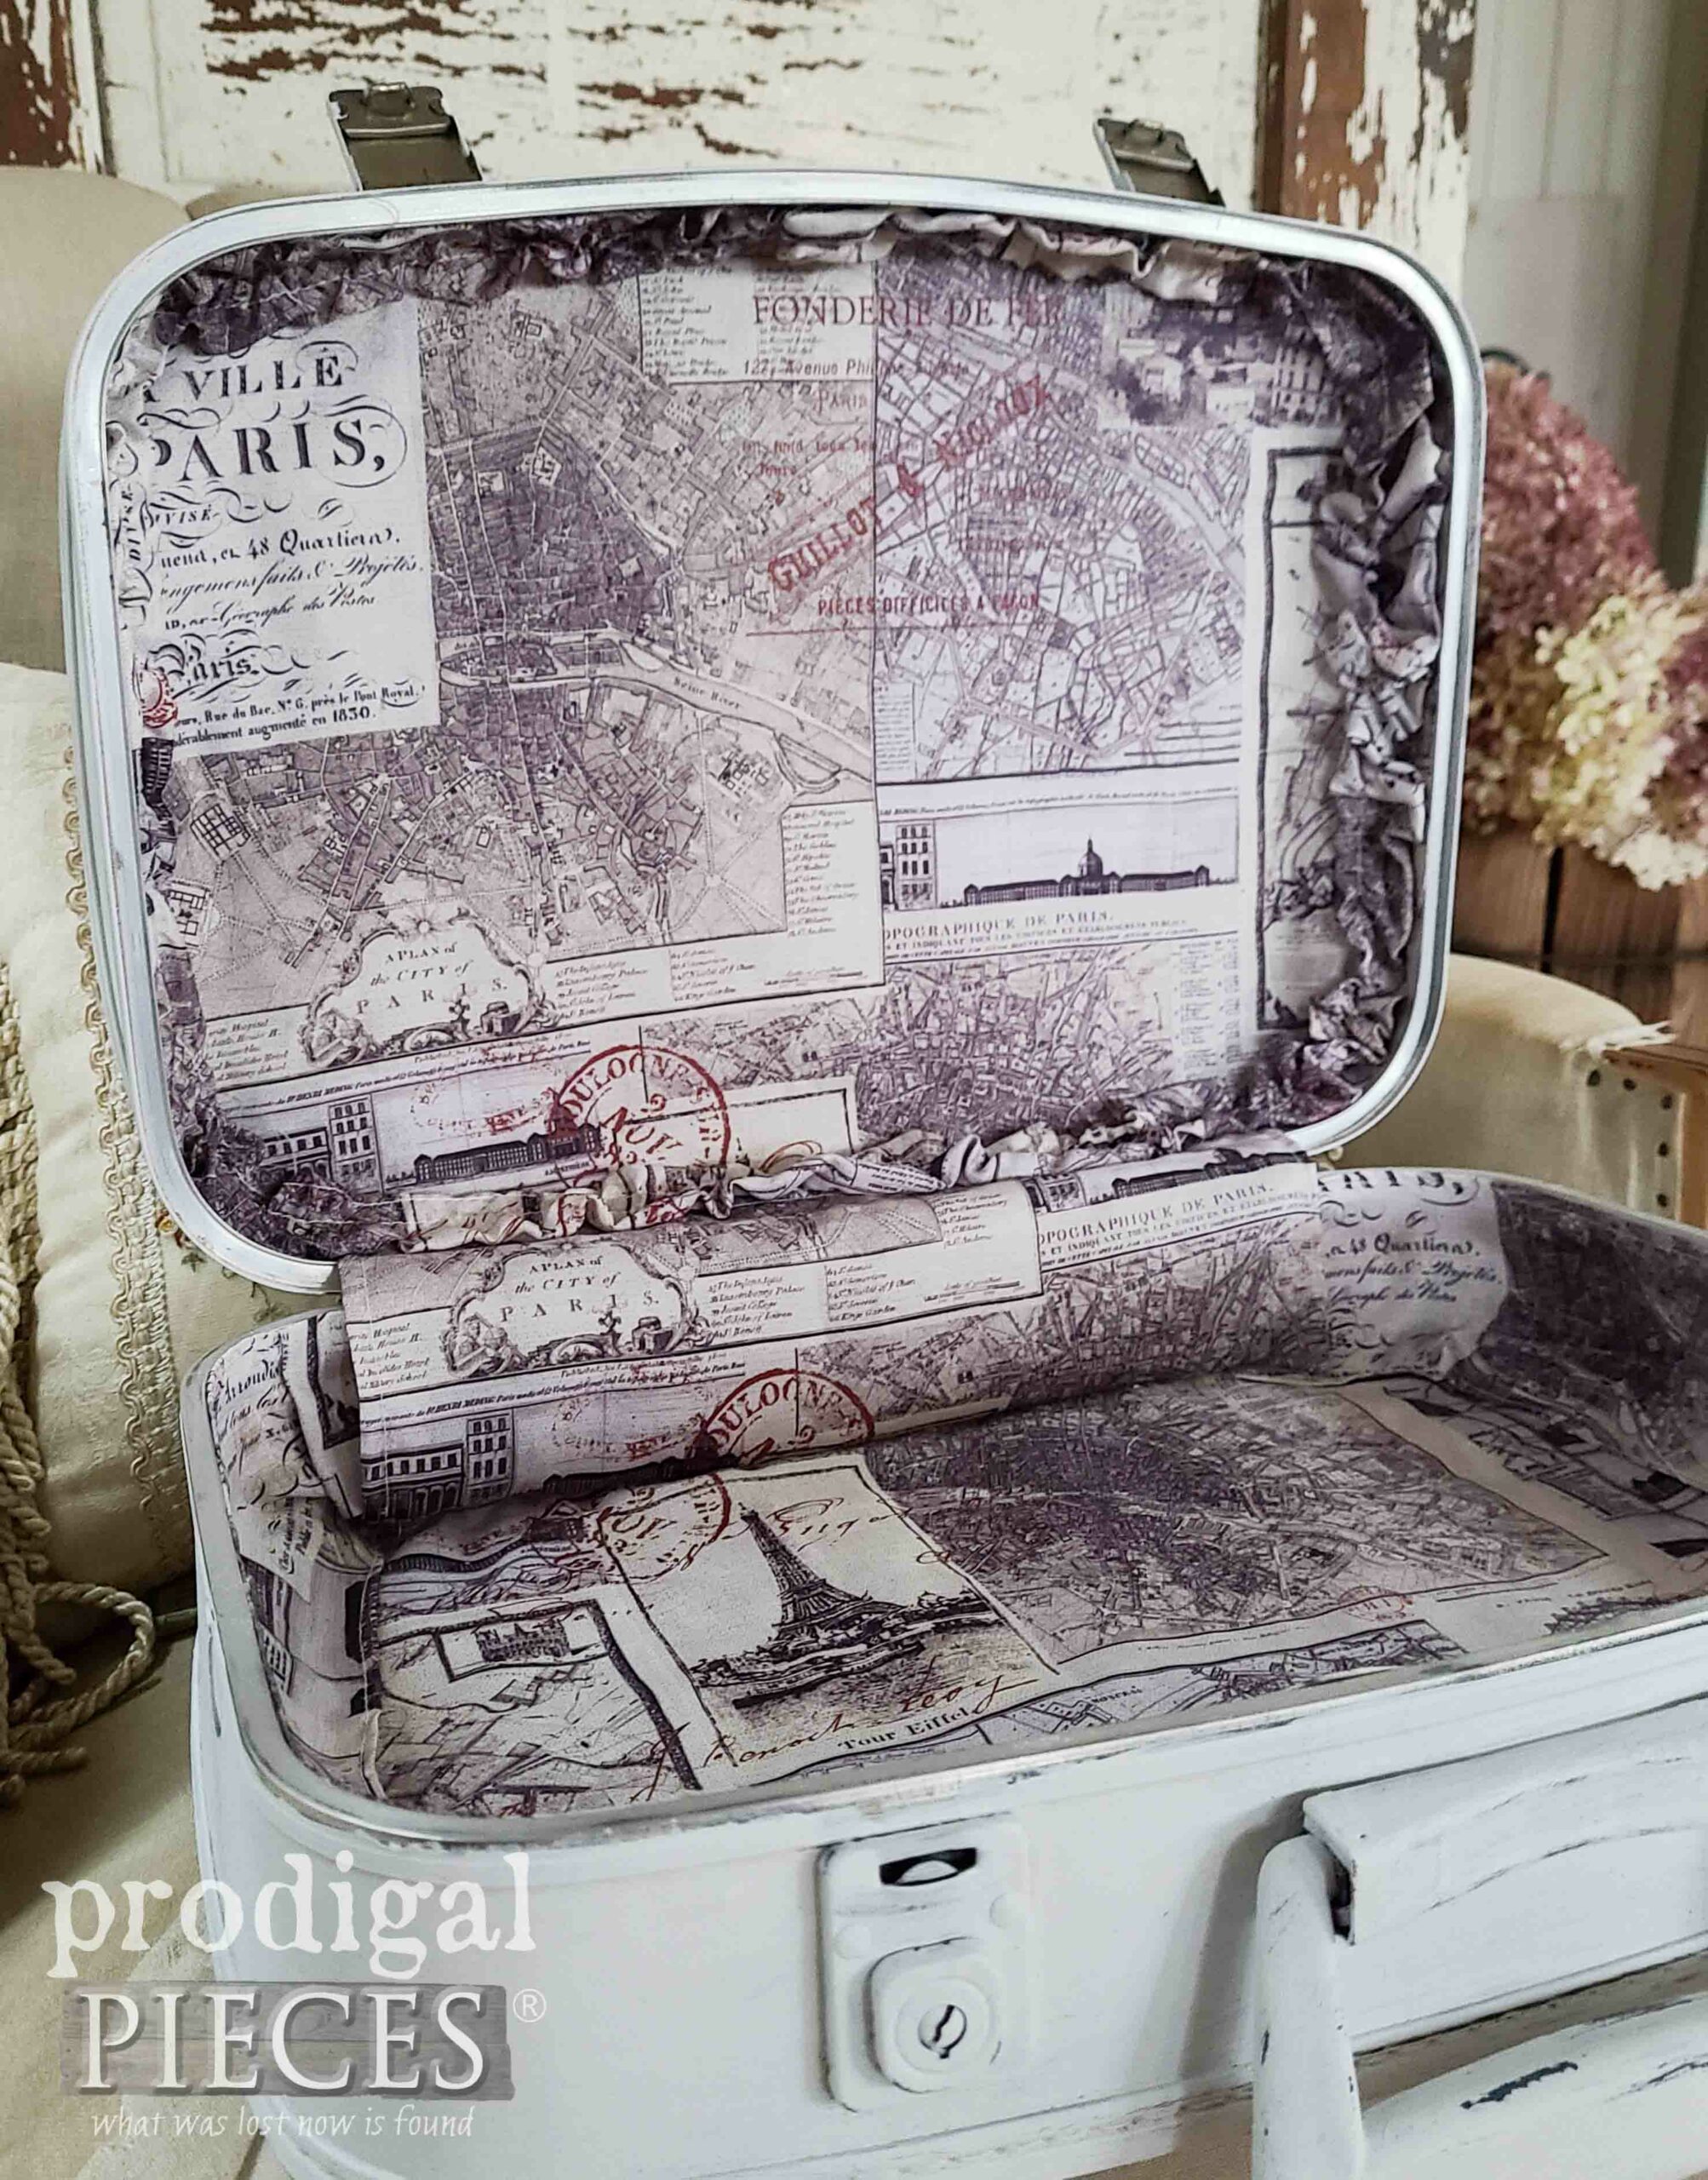 Upcycled French Chic Suitcase by Larissa of Prodigal Pieces | prodigalpieces.com #prodigalpieces